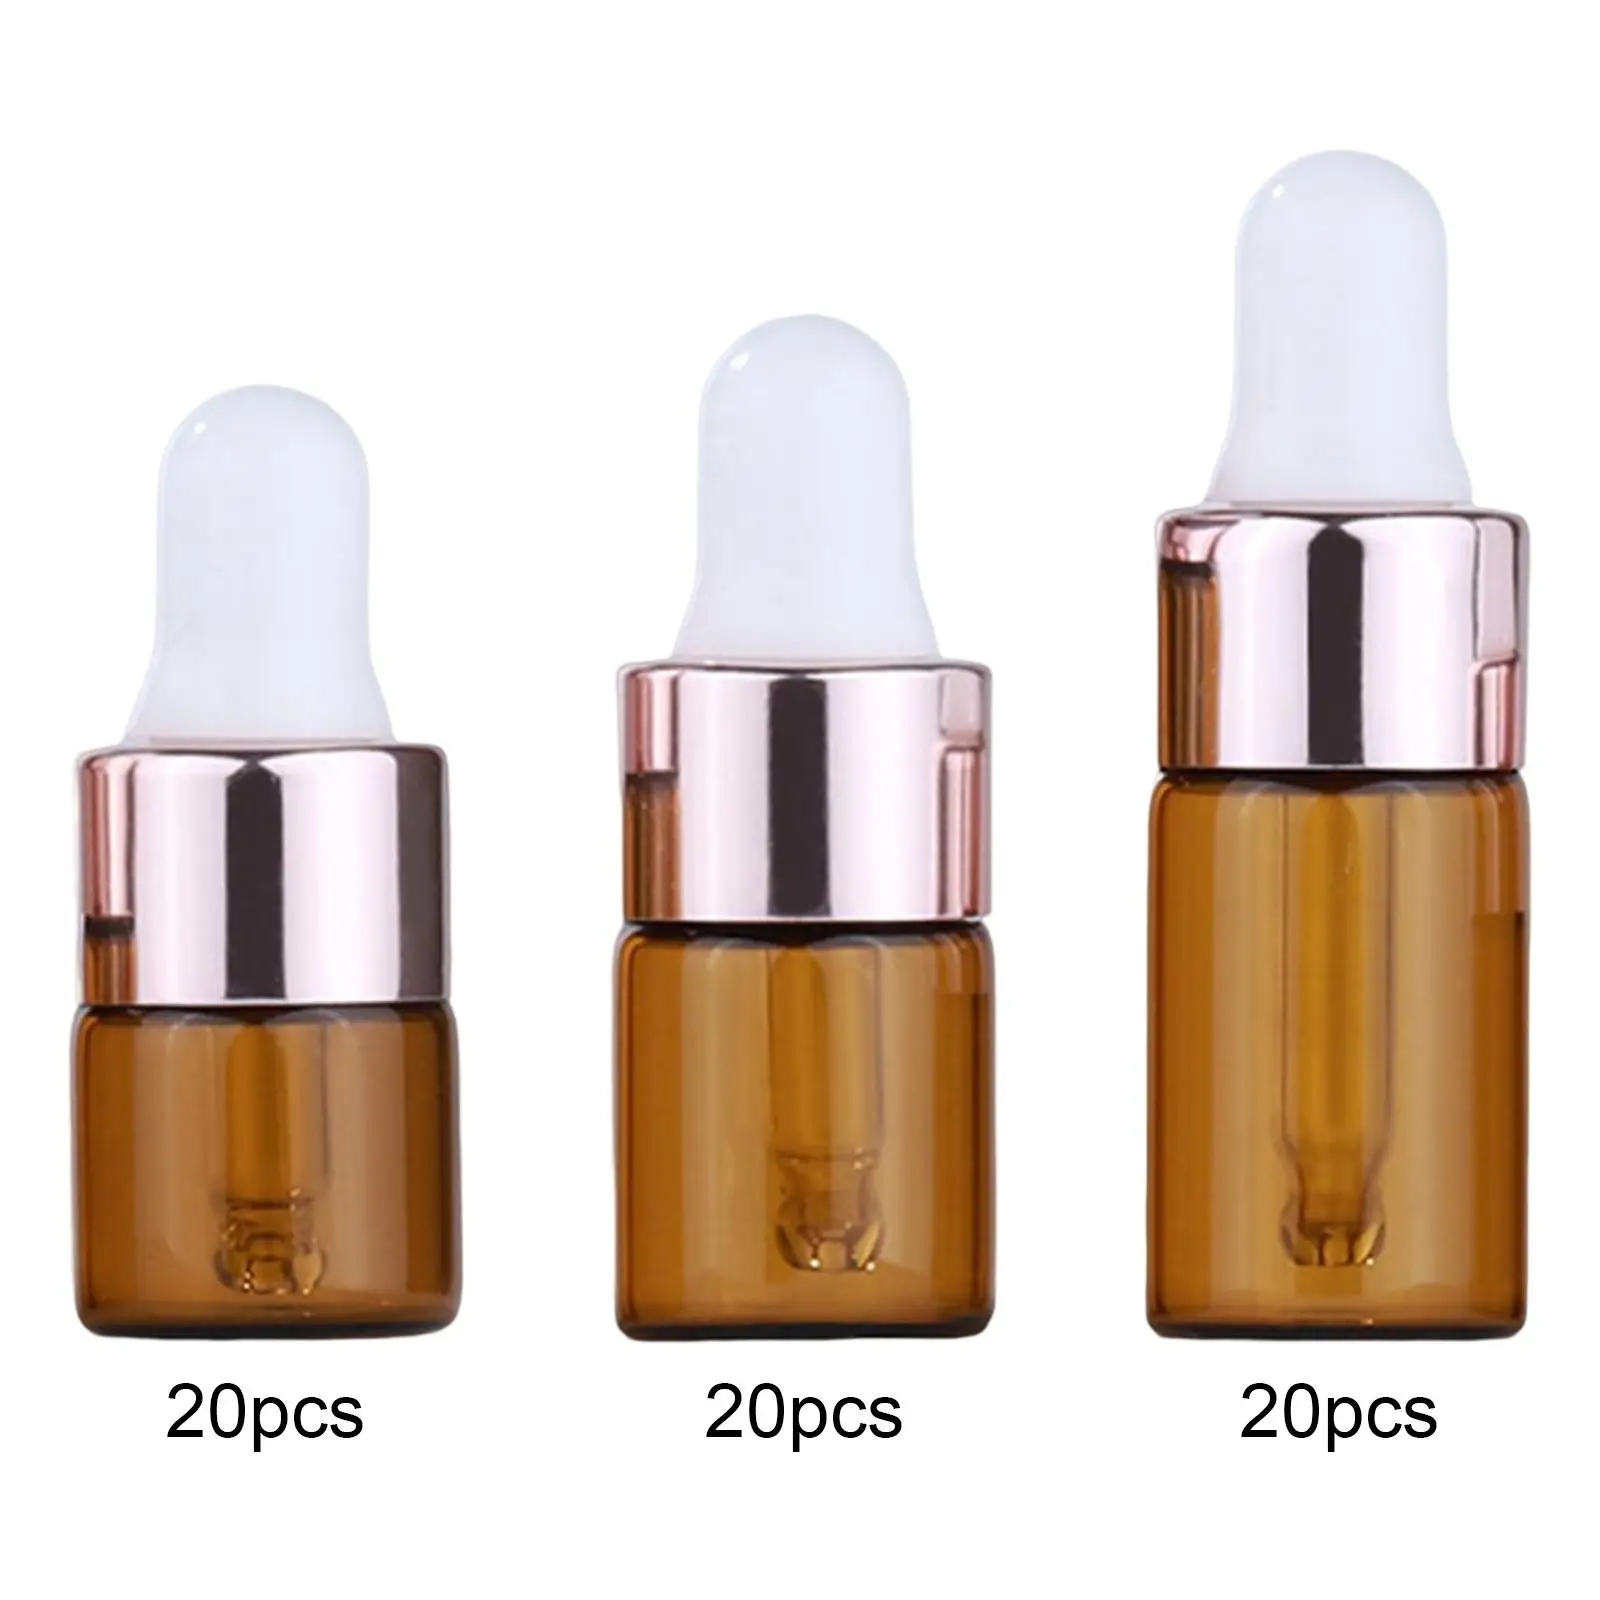 20 Pieces Mini Empty Glass Dropper Bottles Refillable Travel Bottles with Eye Droppers for Essential Oil Cosmetic Hair Oil